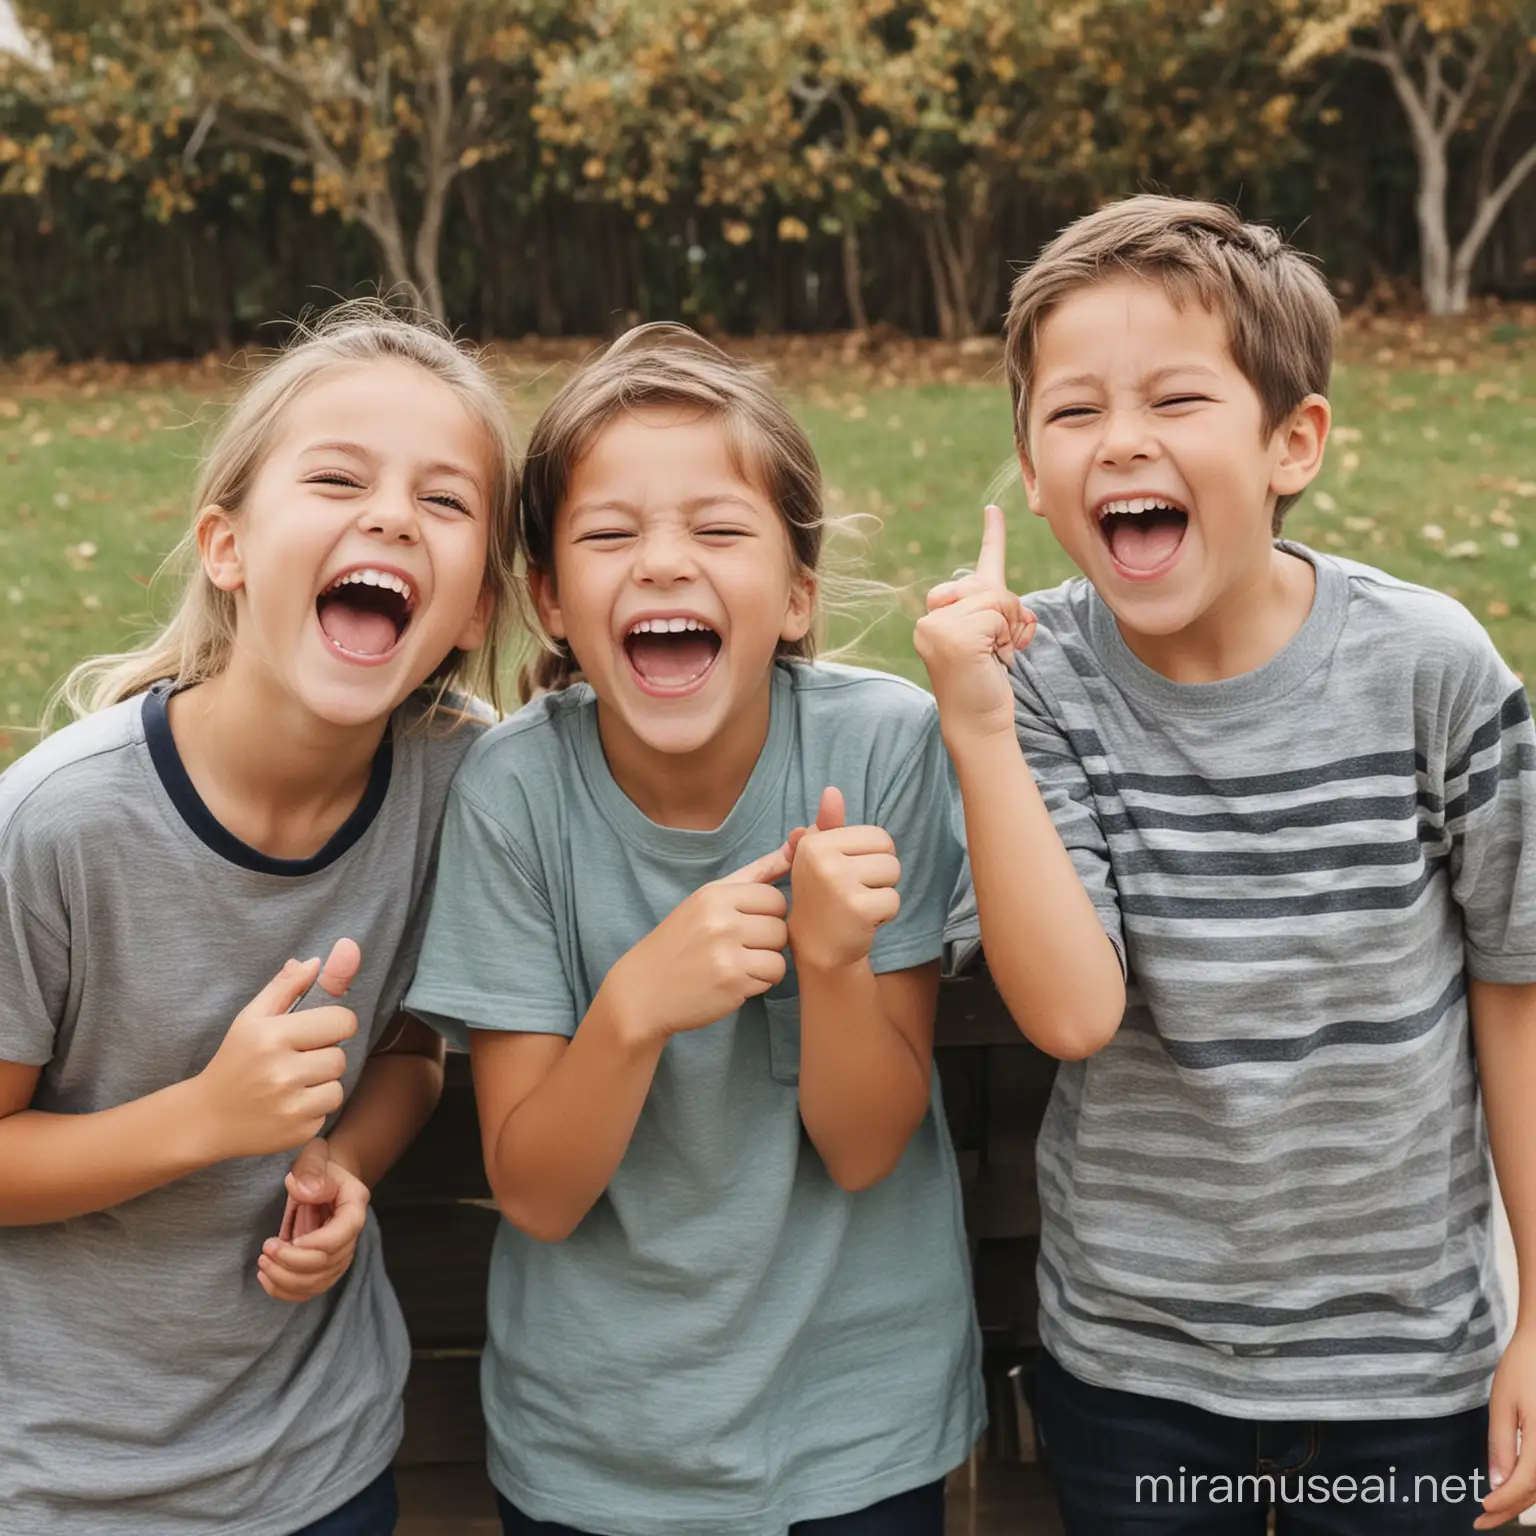 Generate me a picture of kids laughing and pointing out and making  fun of someone